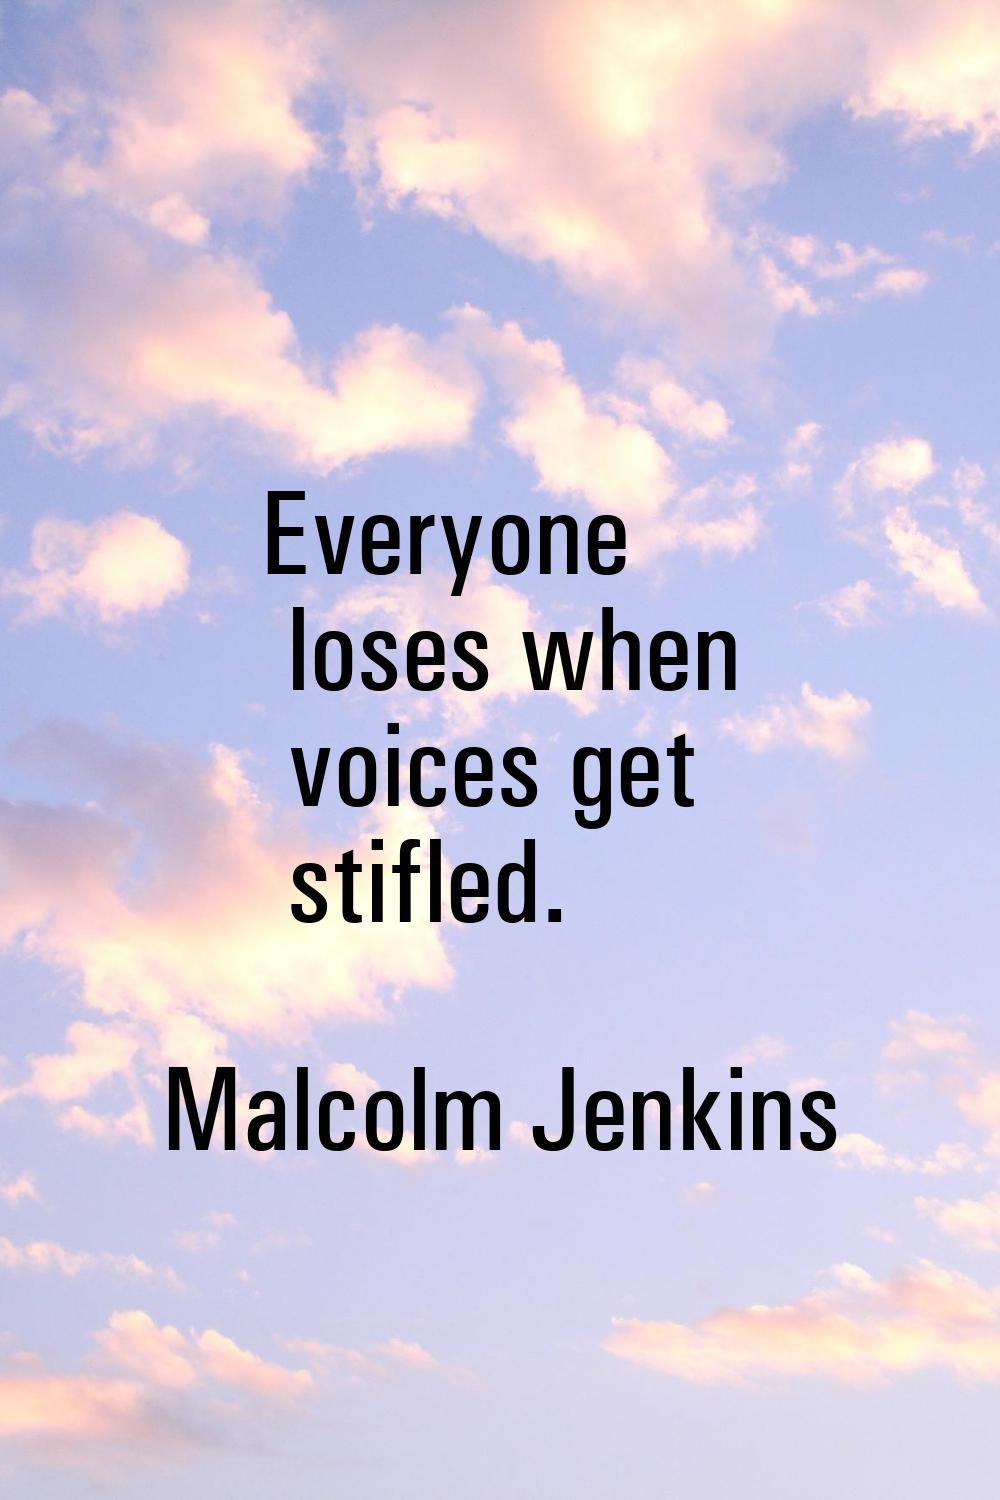 Everyone loses when voices get stifled.